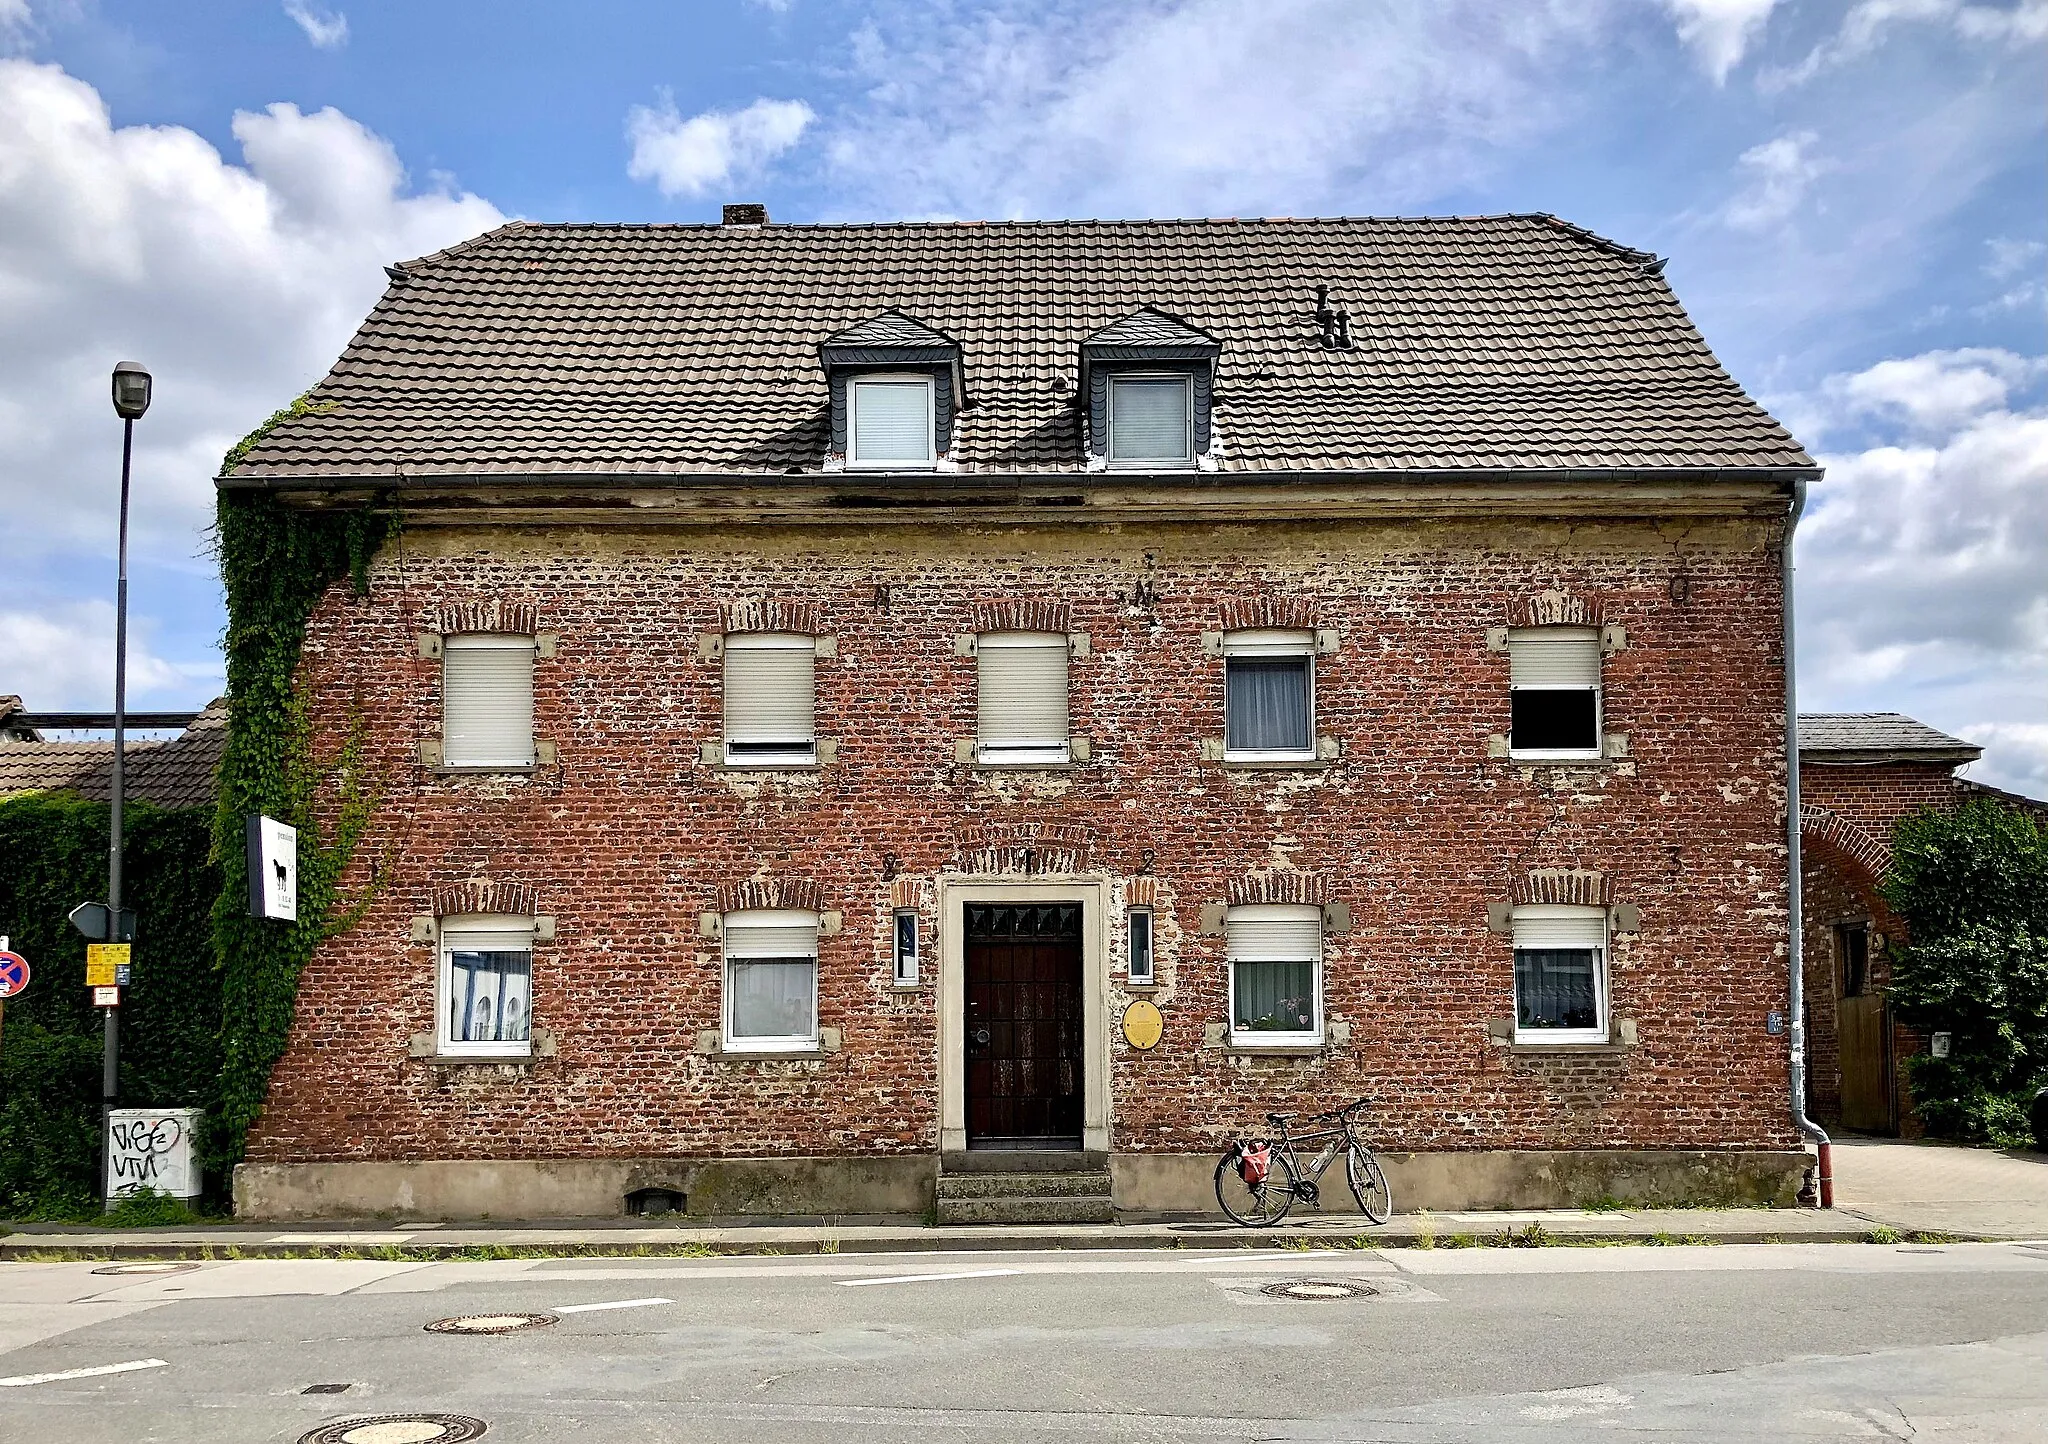 Photo showing: House 13 on Baumberger Strasse (Langenfeld-Rhineland). The local name of the house is Brandshof.